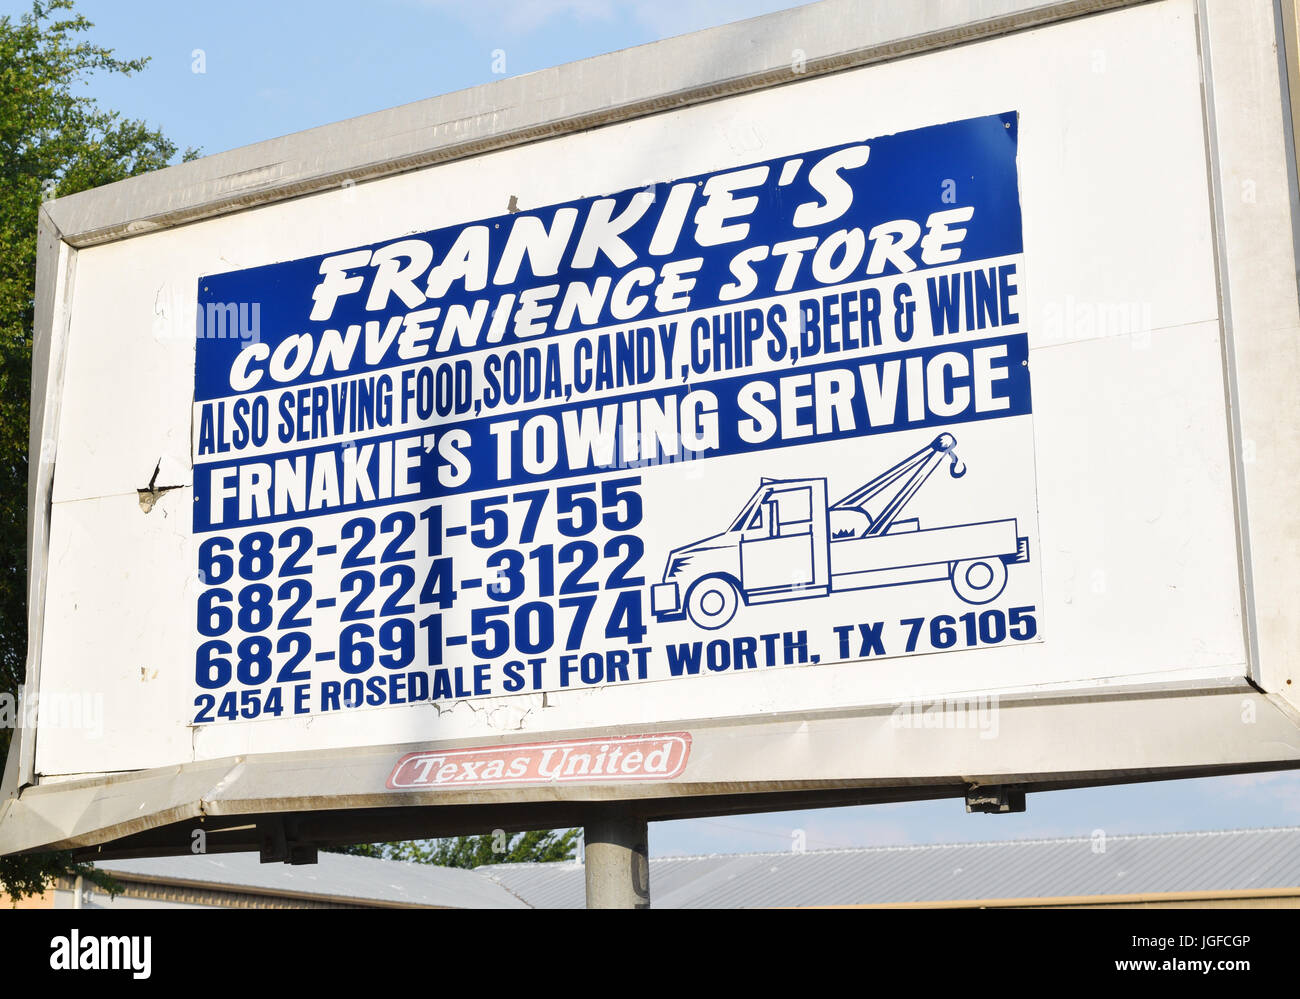 Frankie's Convenience Store and Towing Service Sign Stock Photo